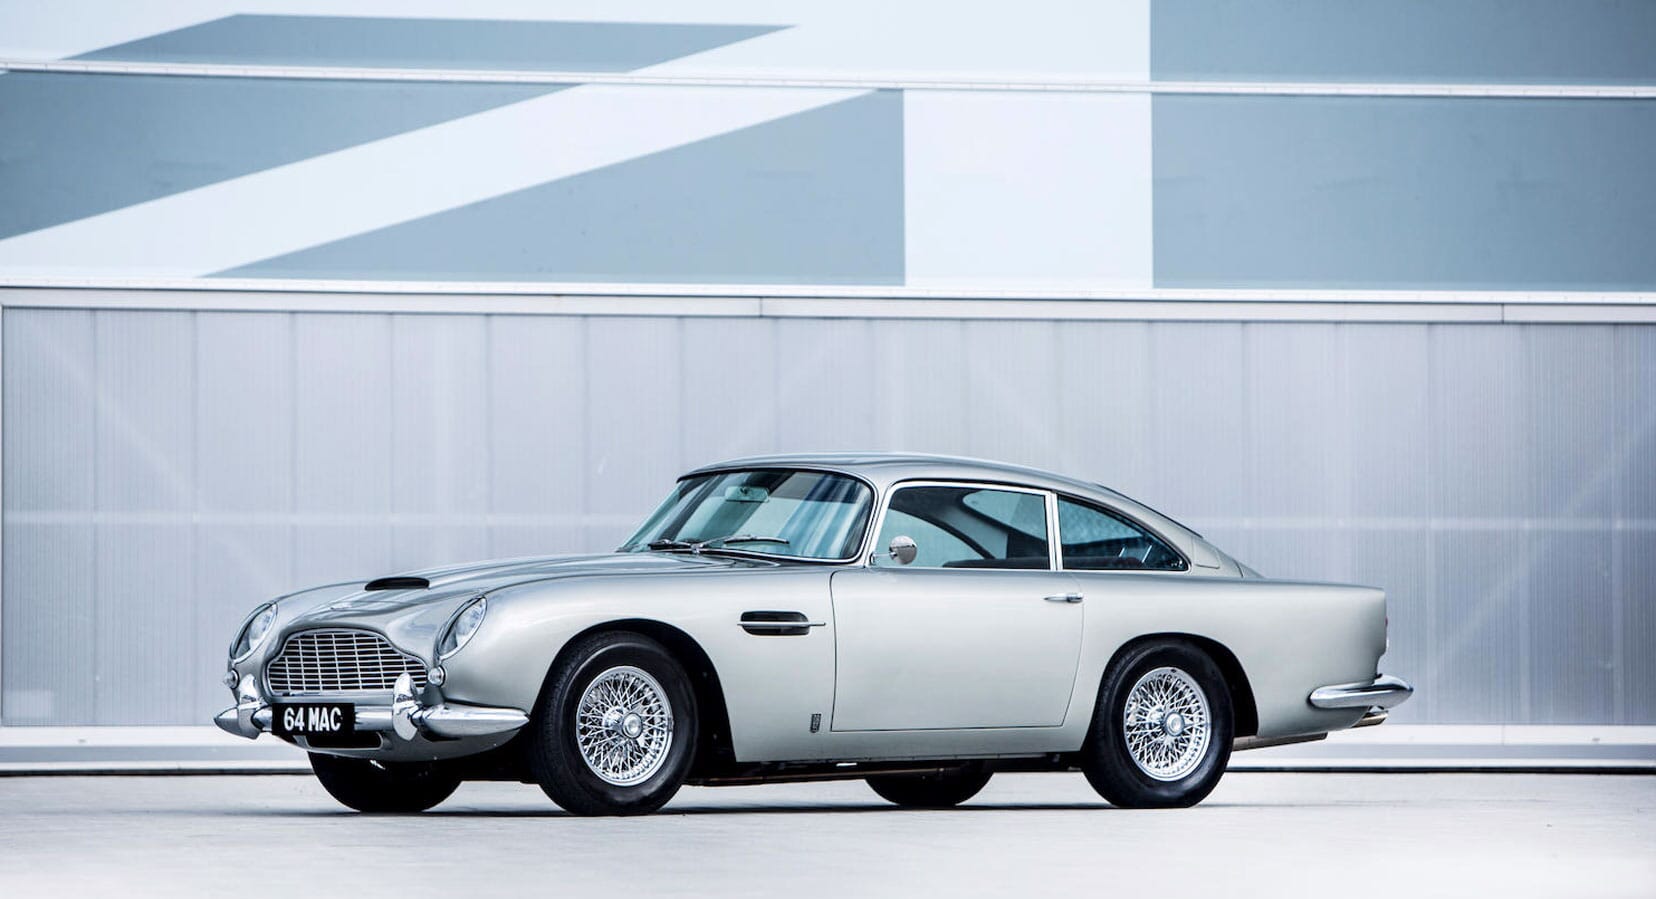 Paul McCartney’s Aston Martin Can Be Yours For Nearly $2 Million